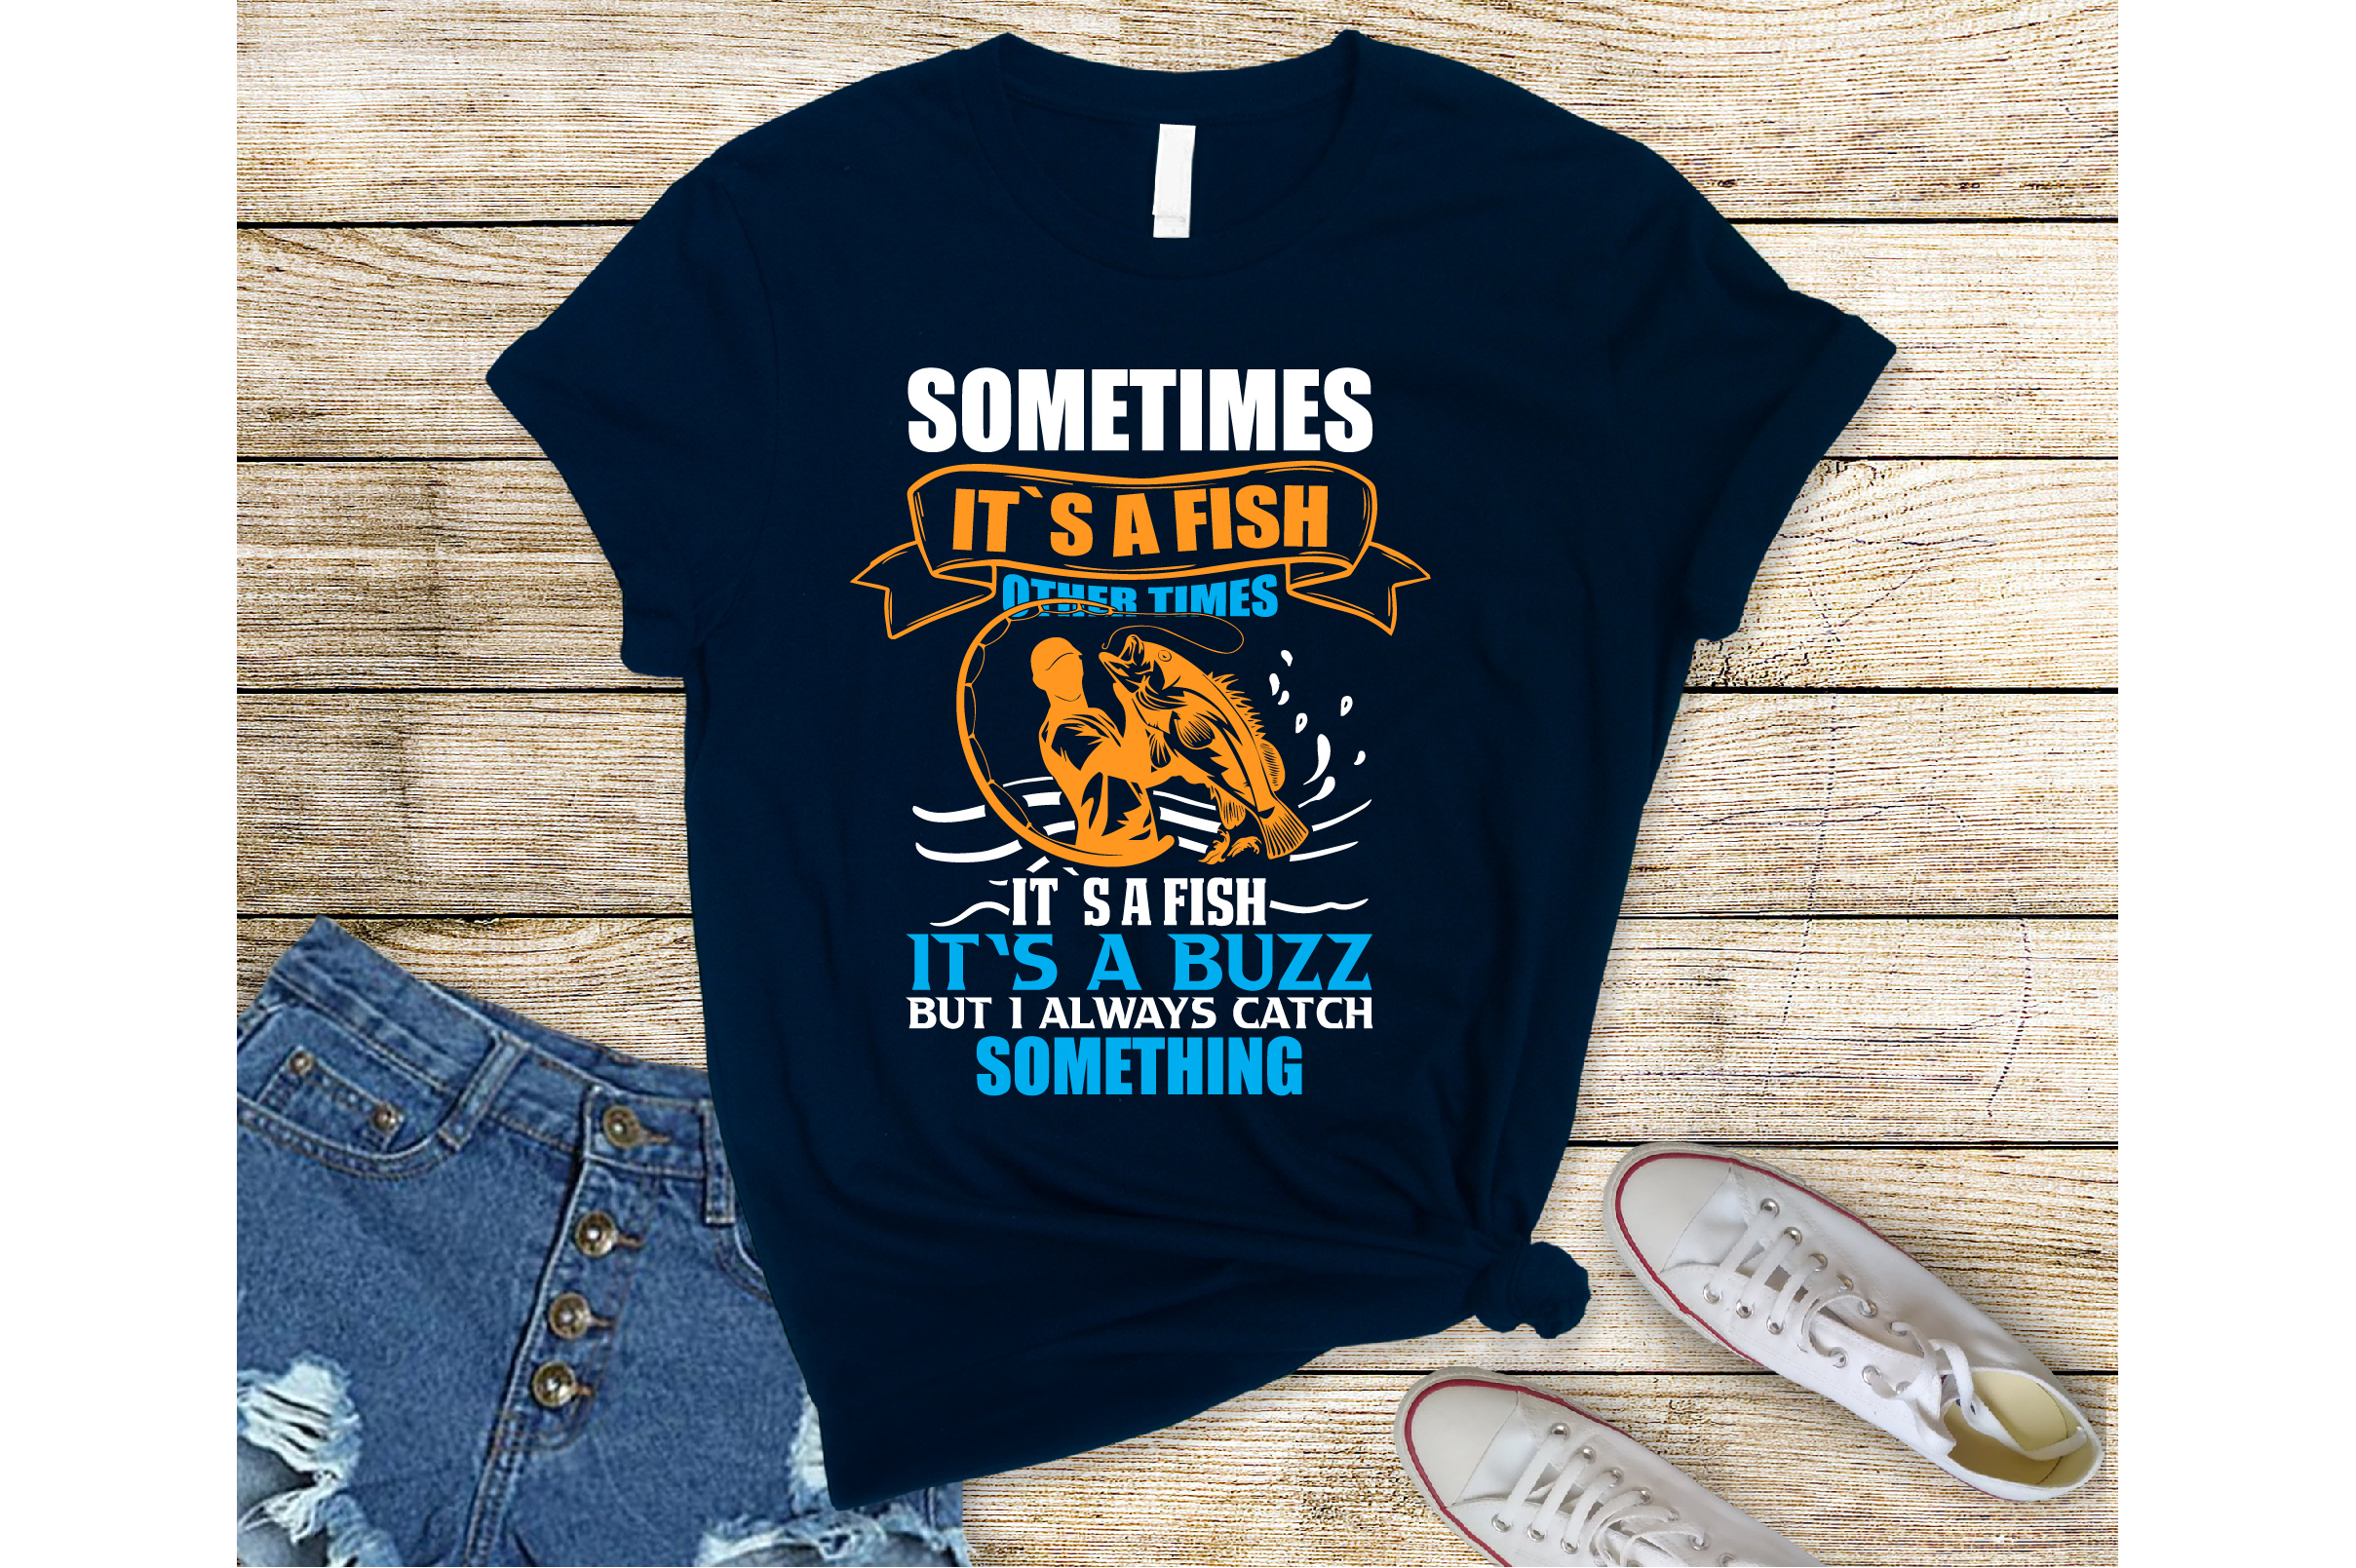 Sometimes It's A Fish Other Times It's A Buzz Vintage T-shirt, Funny  Fishing Shirt, Fishing Lover Shirt, Gift Tee for You and Your Family 